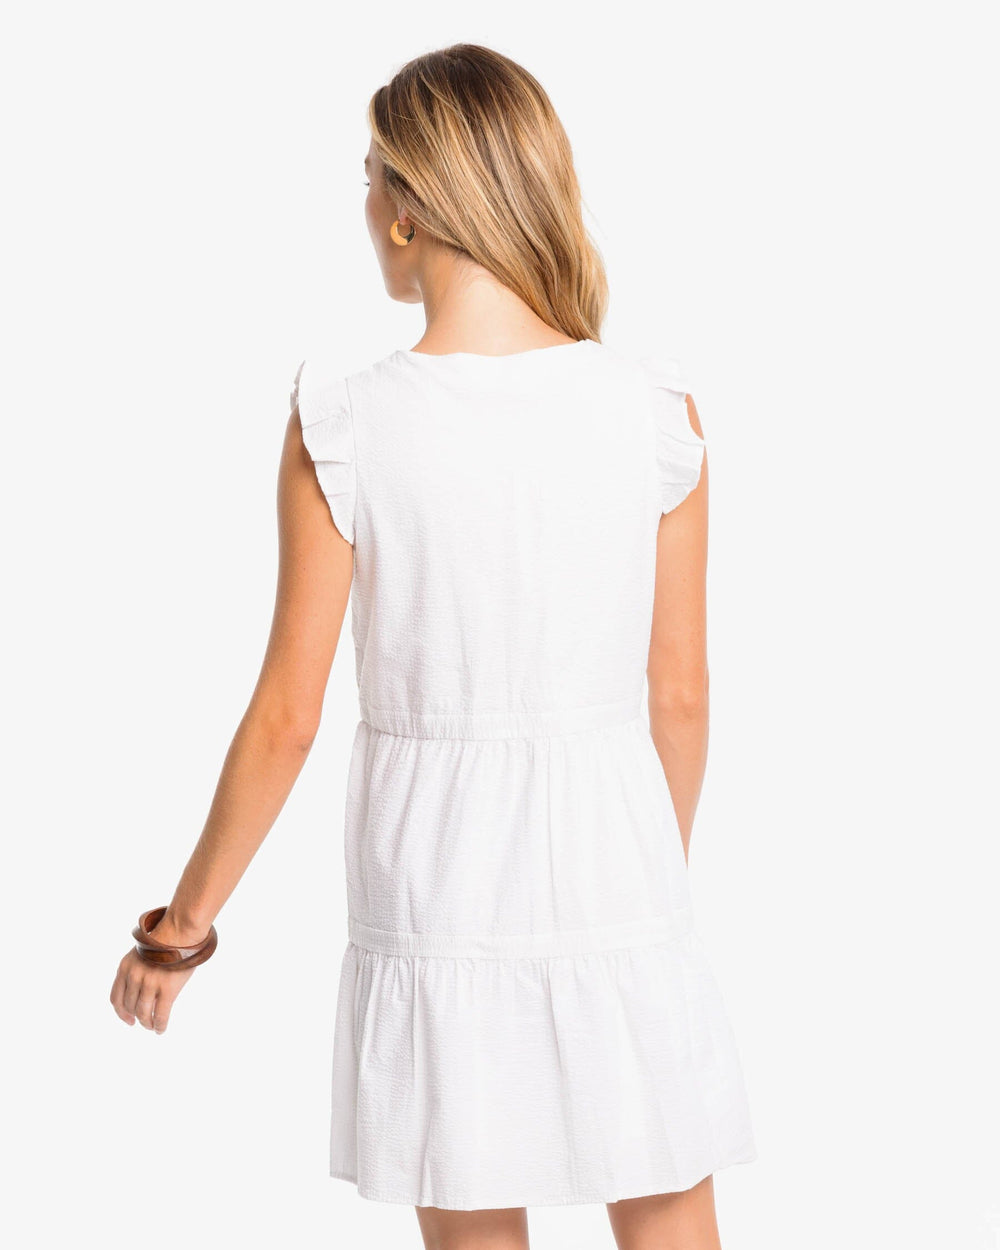 The back view of the Southern Tide Evelyn Seersucker Tiered Dress by Southern Tide - Classic White